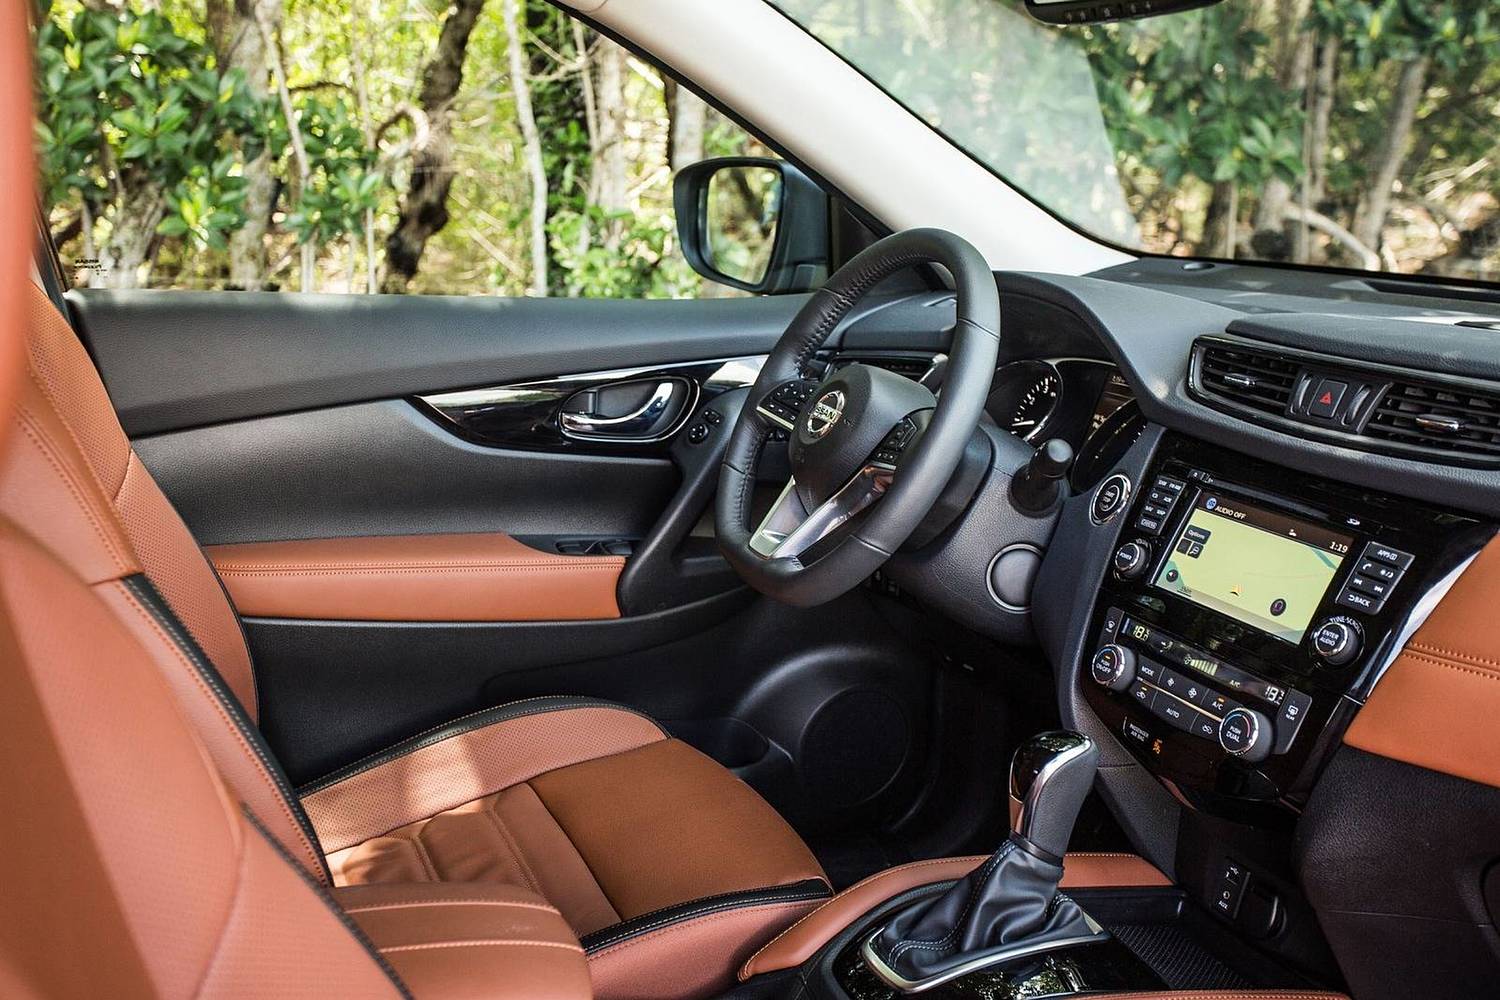 Nissan Rogue SL 4dr SUV Interior. Platinum Reserve Package Shown. (2017 model year shown)